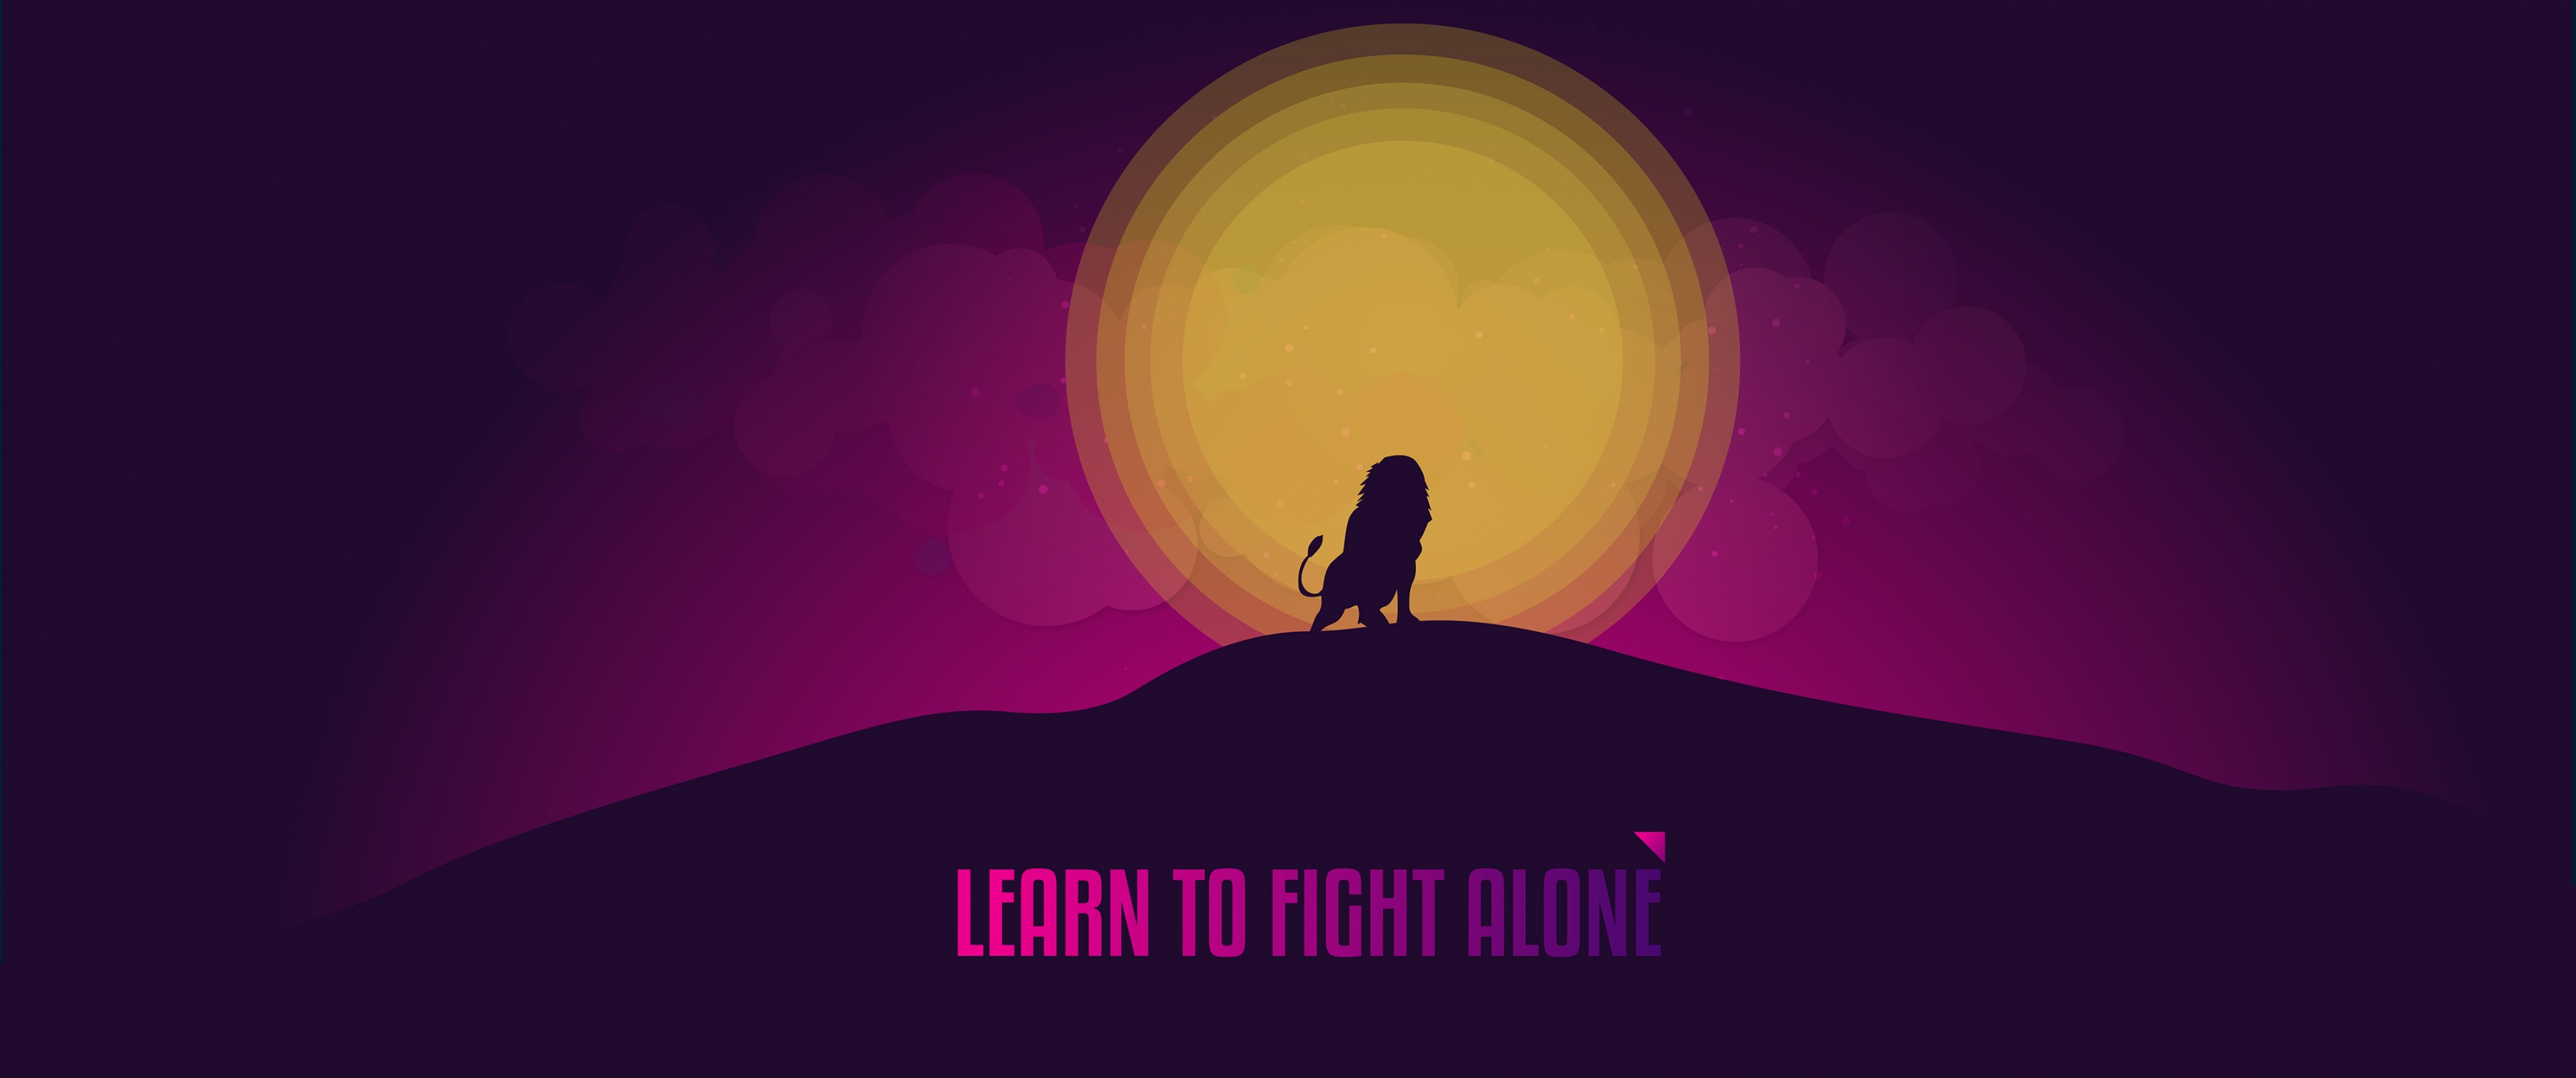 Learn to Fight Alone Wallpaper 4K, Popular quotes, Inspirational quotes